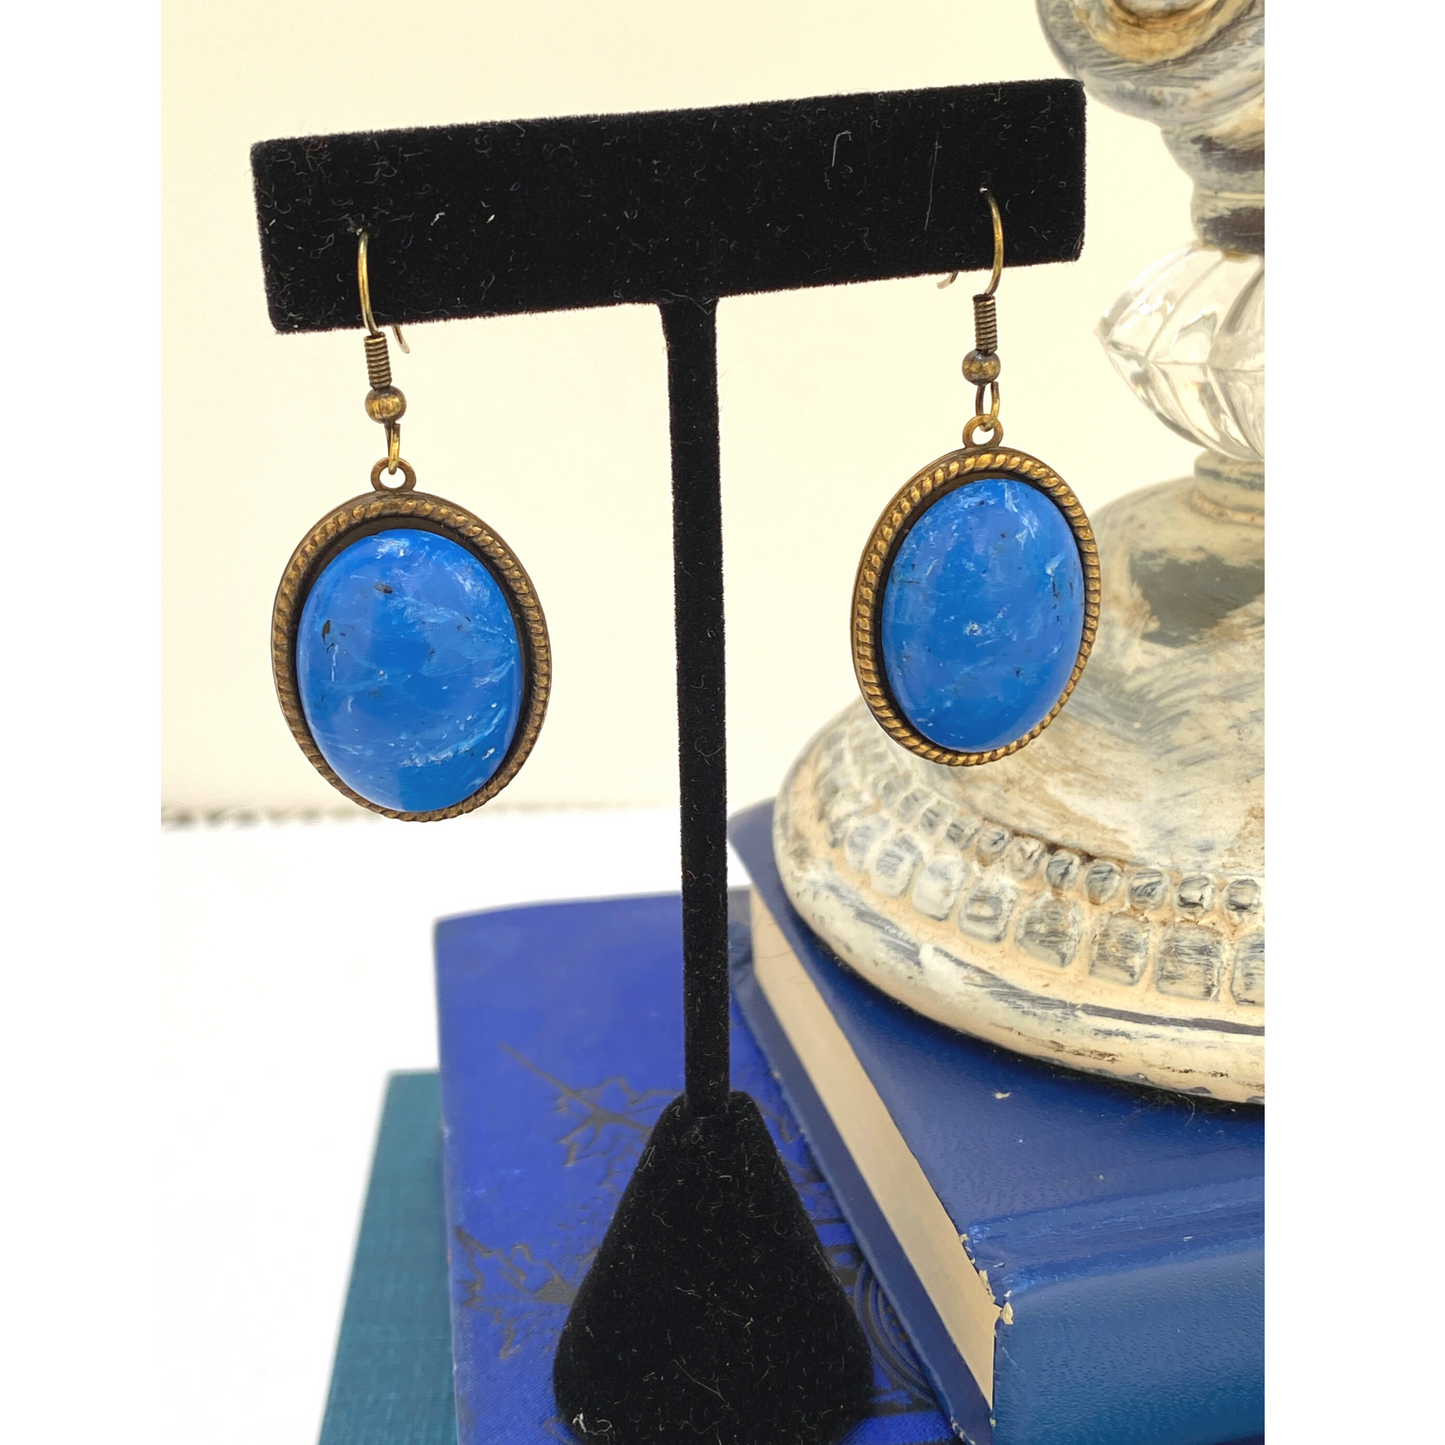 Earring, Classic Blue, Oval Cabochon, Antique Gold French Ear Wire, Handmade in USA